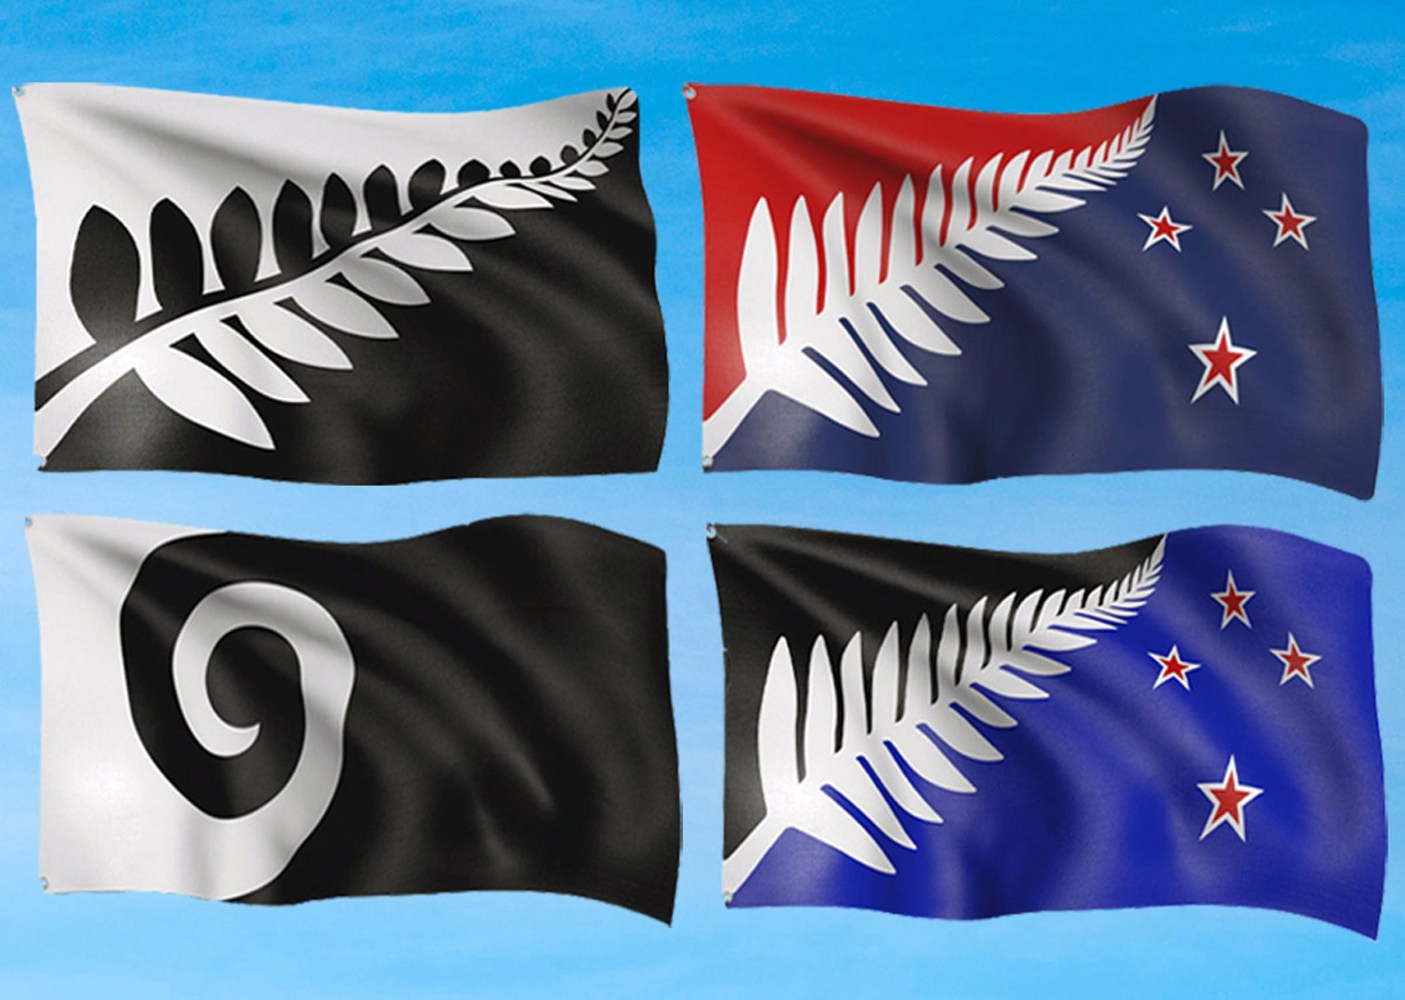 New Zealand Rejects New Flag After $17M Design Contest, Vote - NBC News